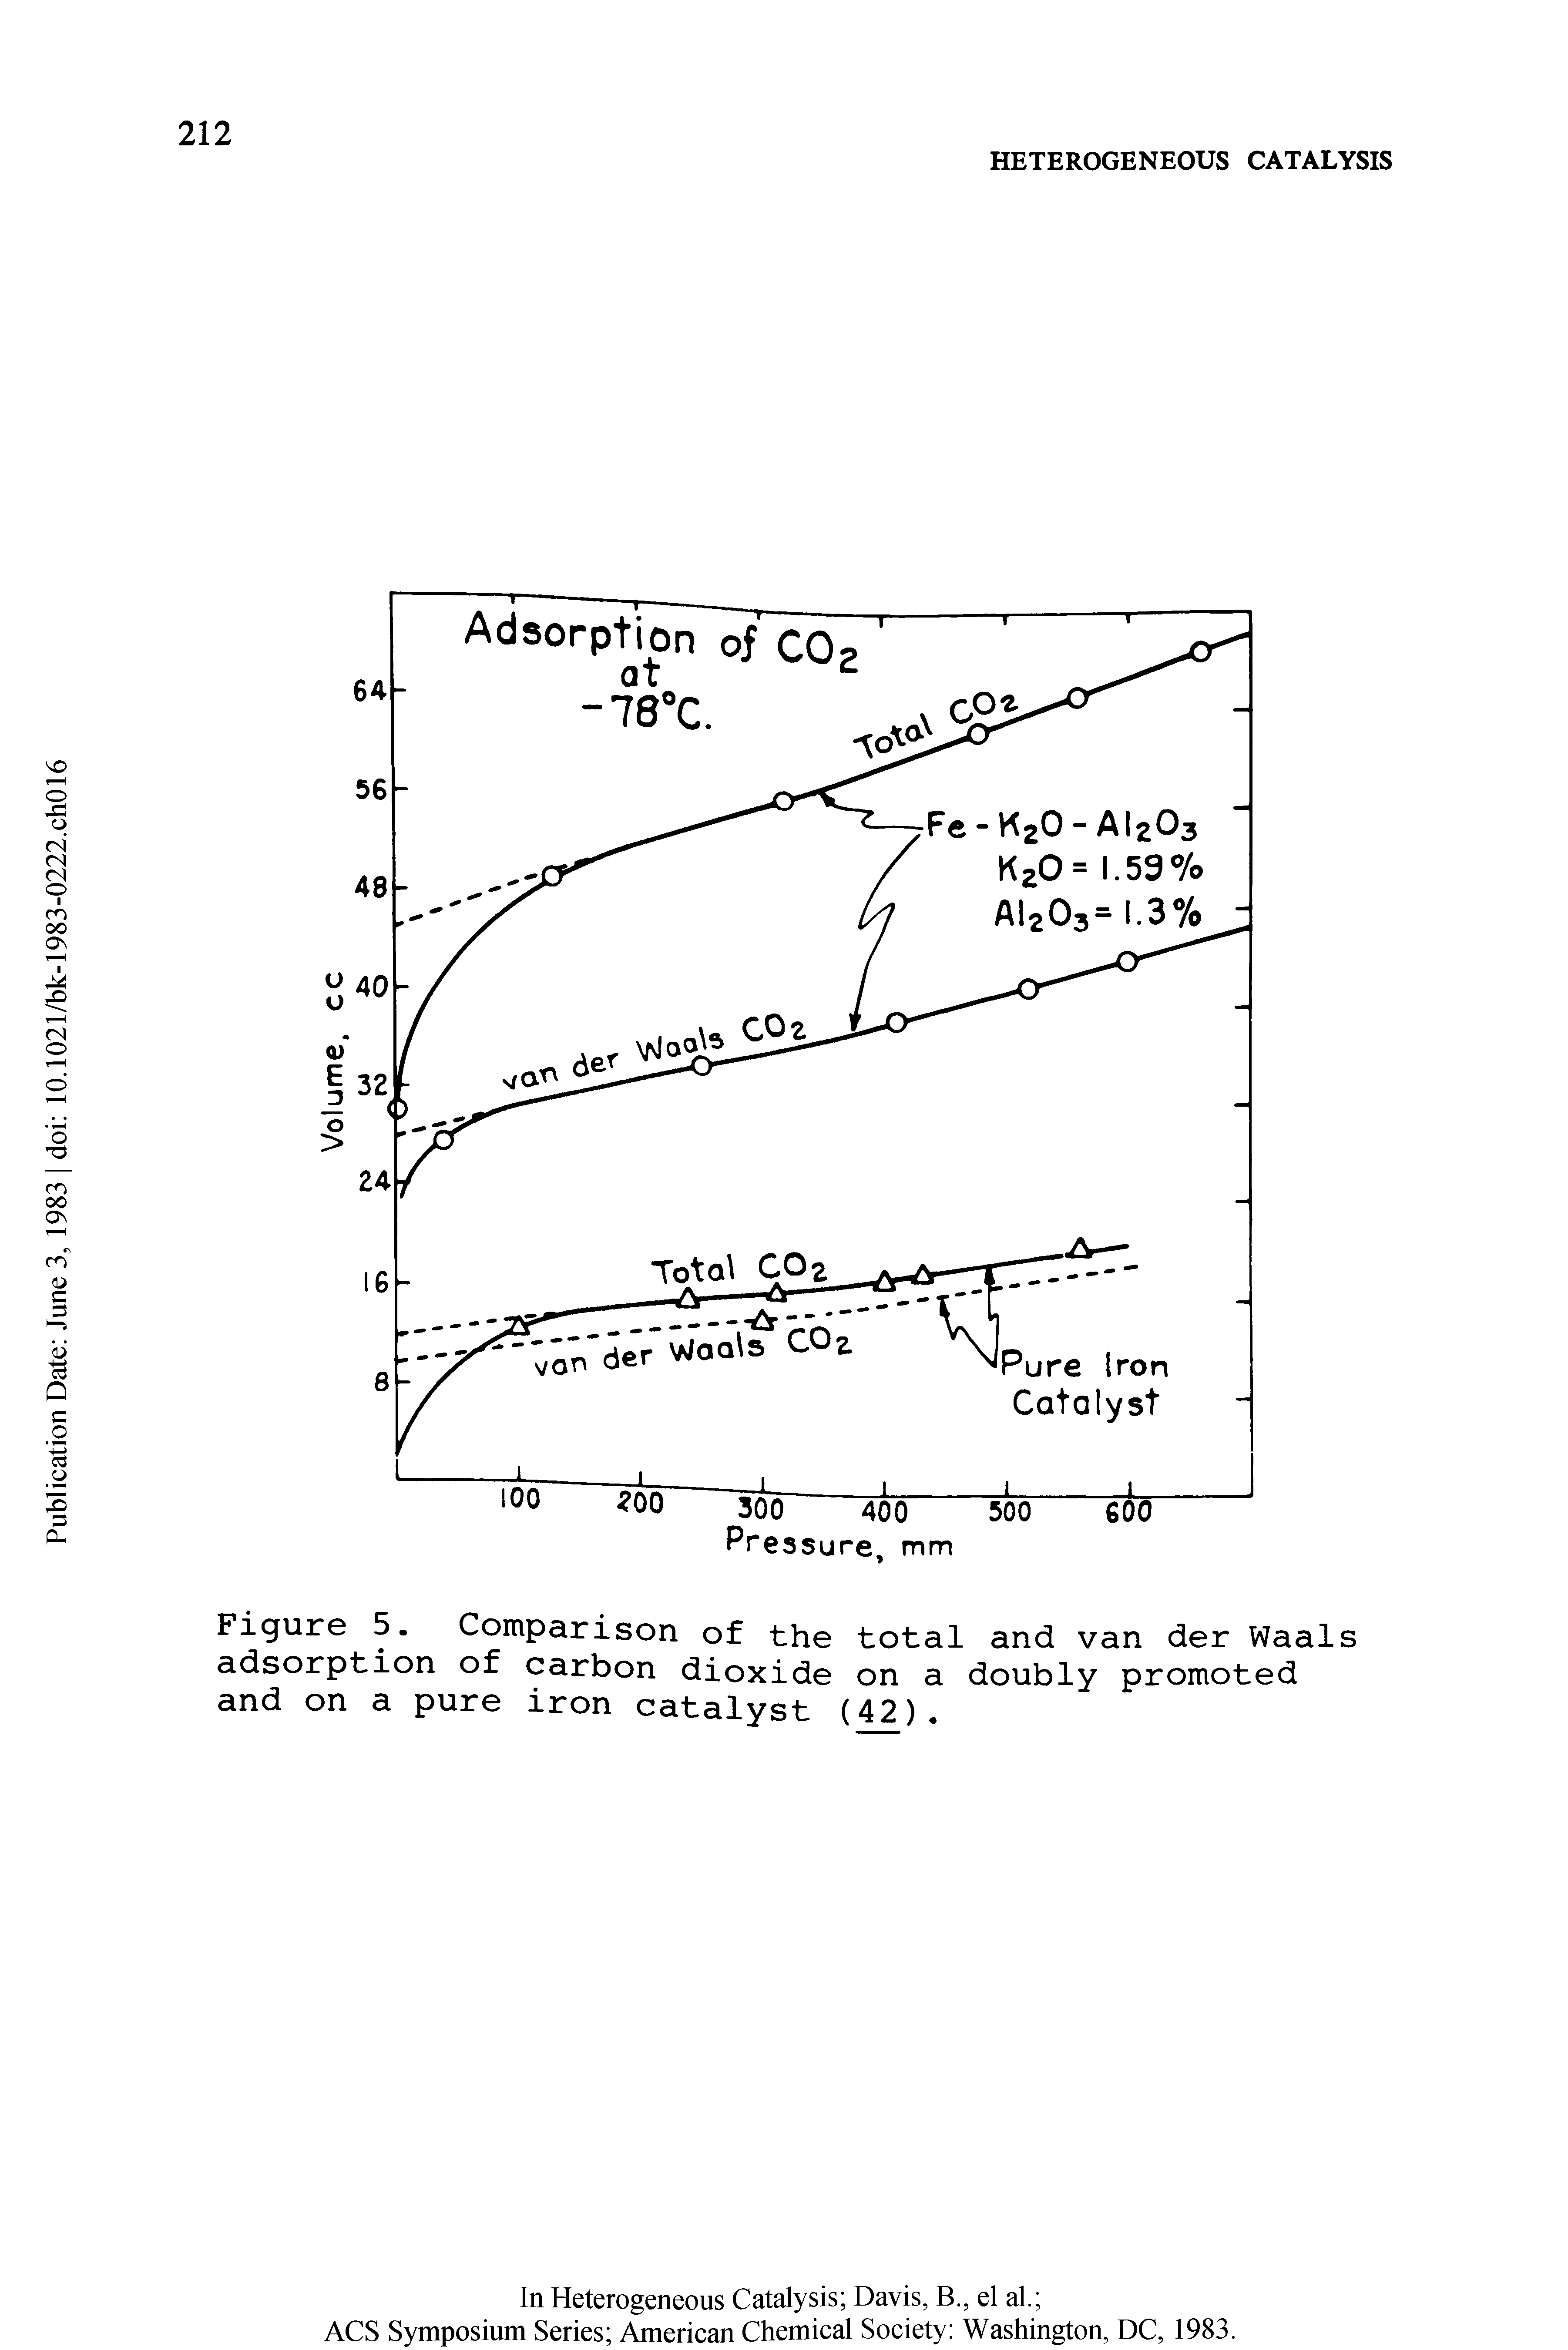 Figure 5. Comparison of the total and van der Waals a sorp ion o carbon dioxide on a doubly promoted and on a pure iron catalyst (42).